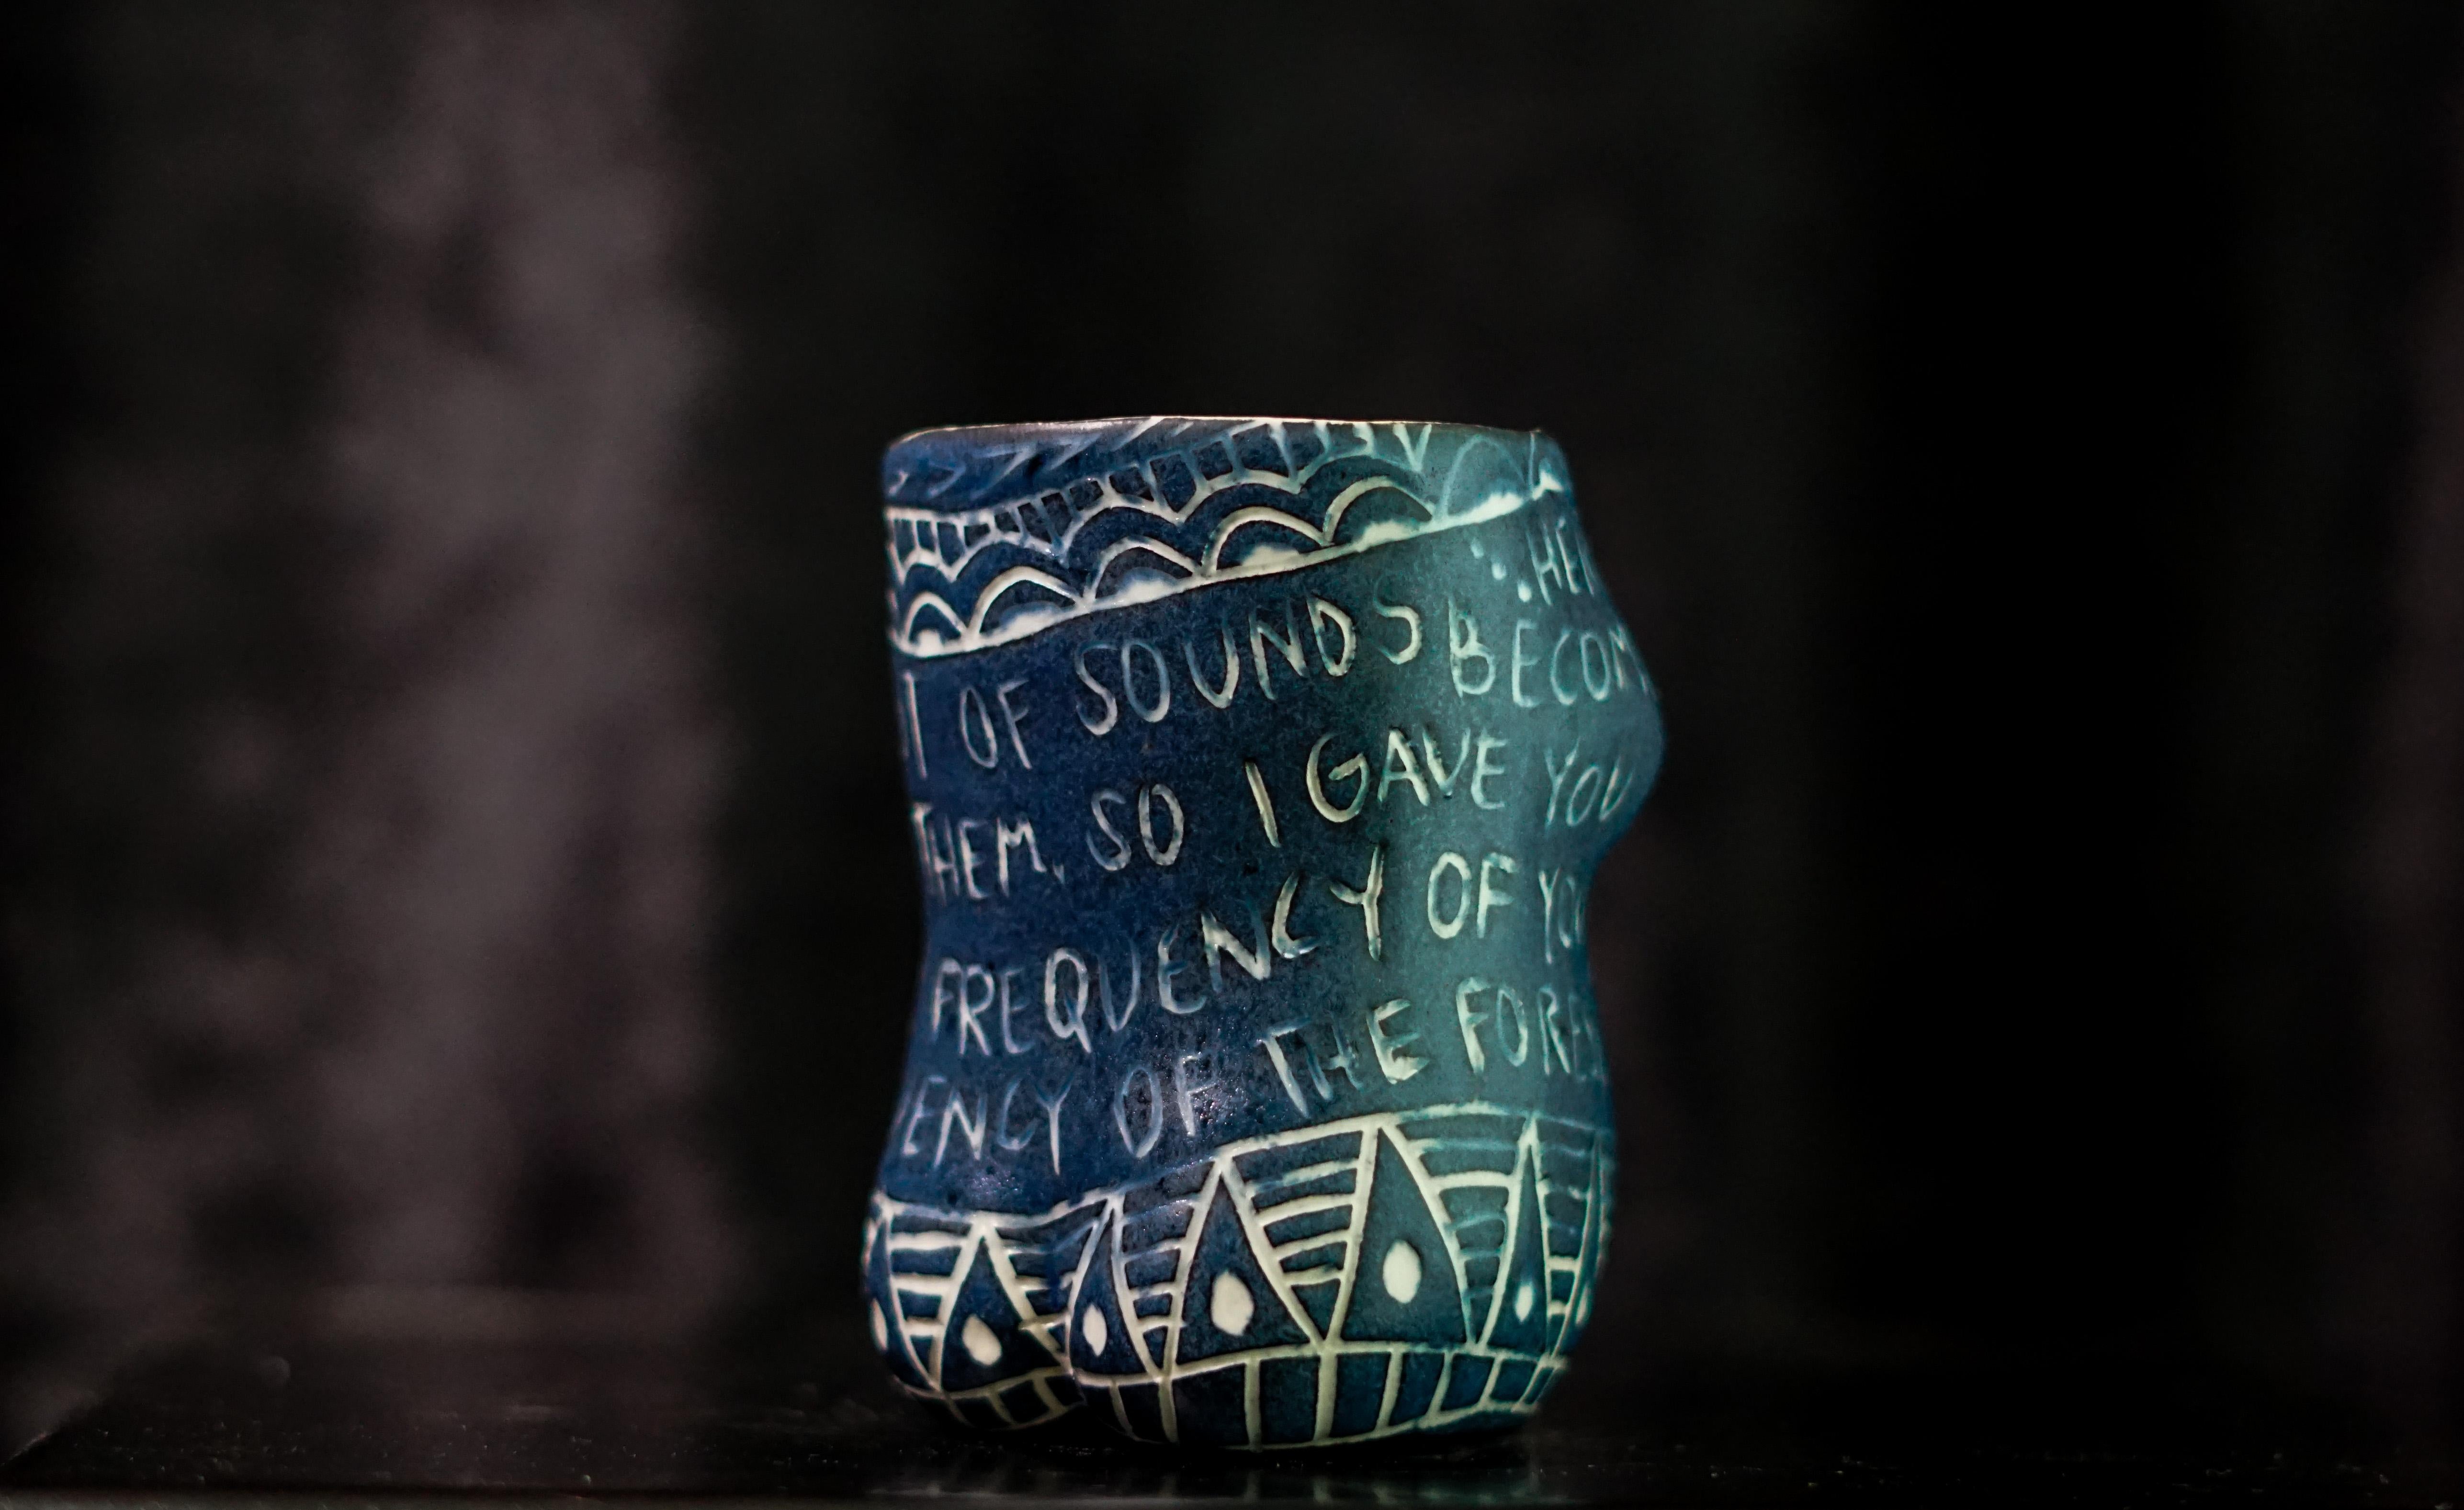 “Here I Learn..”, 2019
From the series Fragments of Our Love Story
Porcelain cup with sgraffito detailing
4 x 3 x 3 inches.

“Here I learn..” Here I learn the smallest of sounds become thunder if you let them. So I gave you silence to hear every